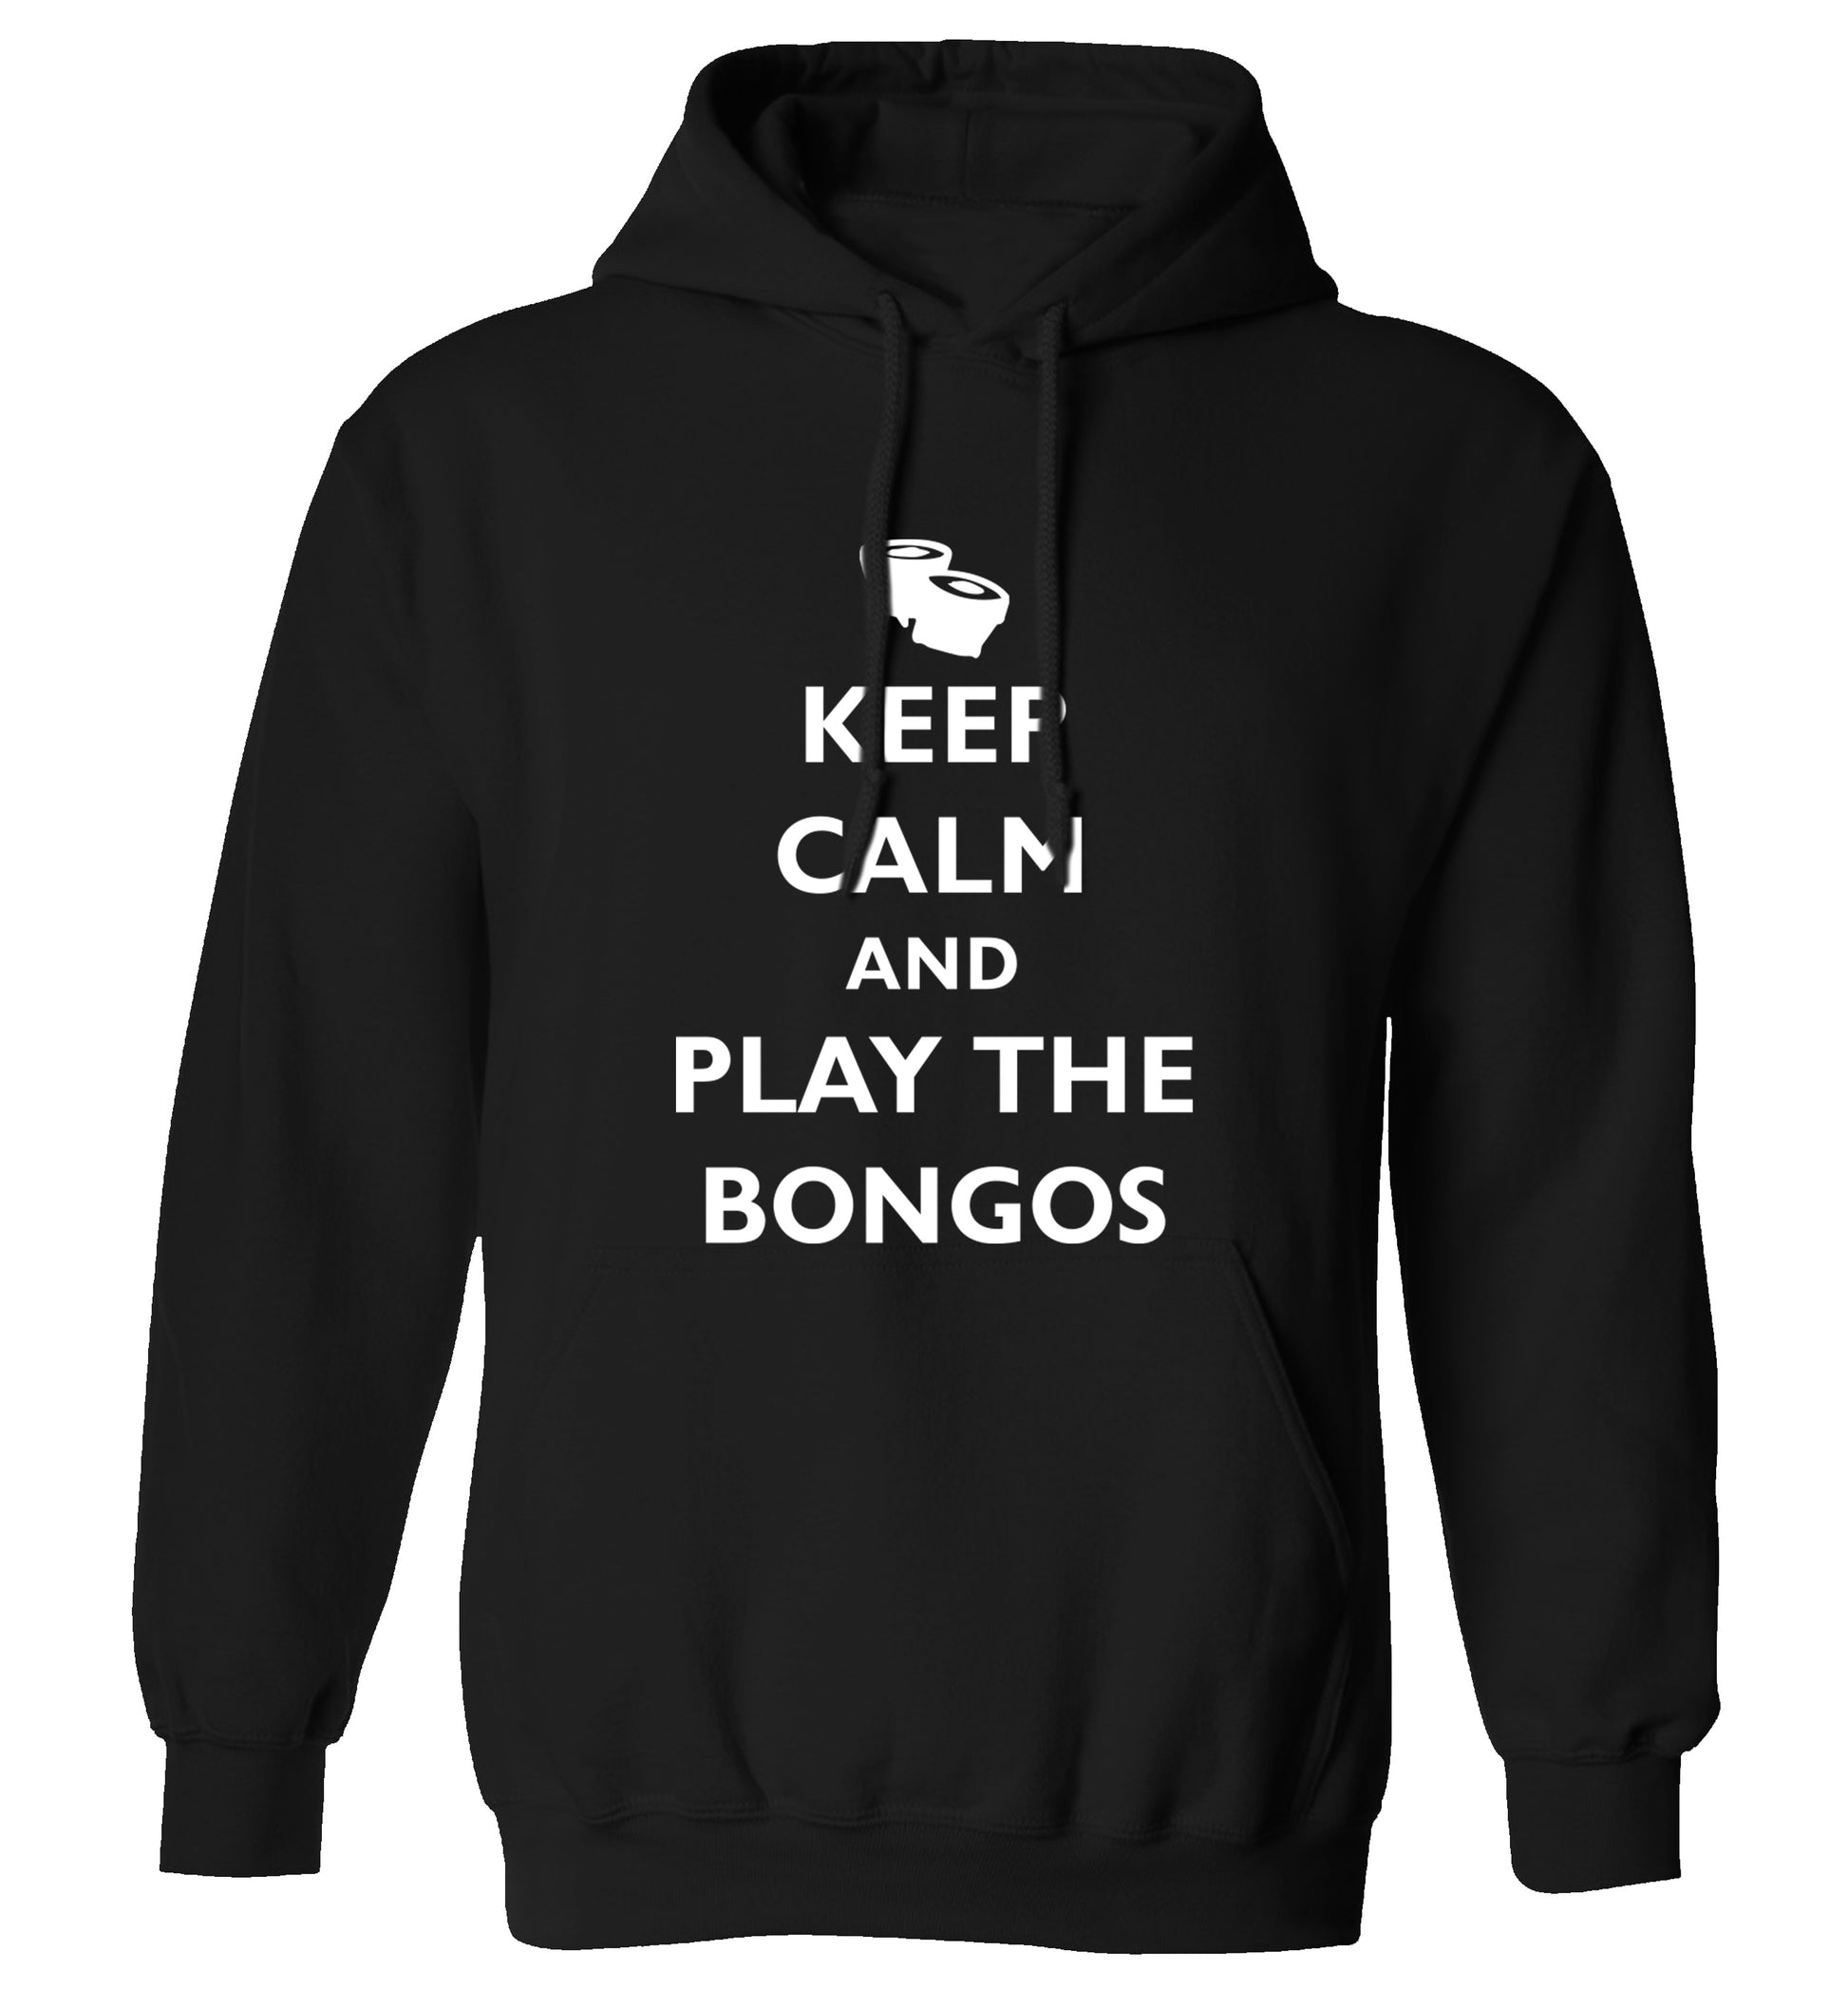 Keep calm and play the bongos adults unisex black hoodie 2XL